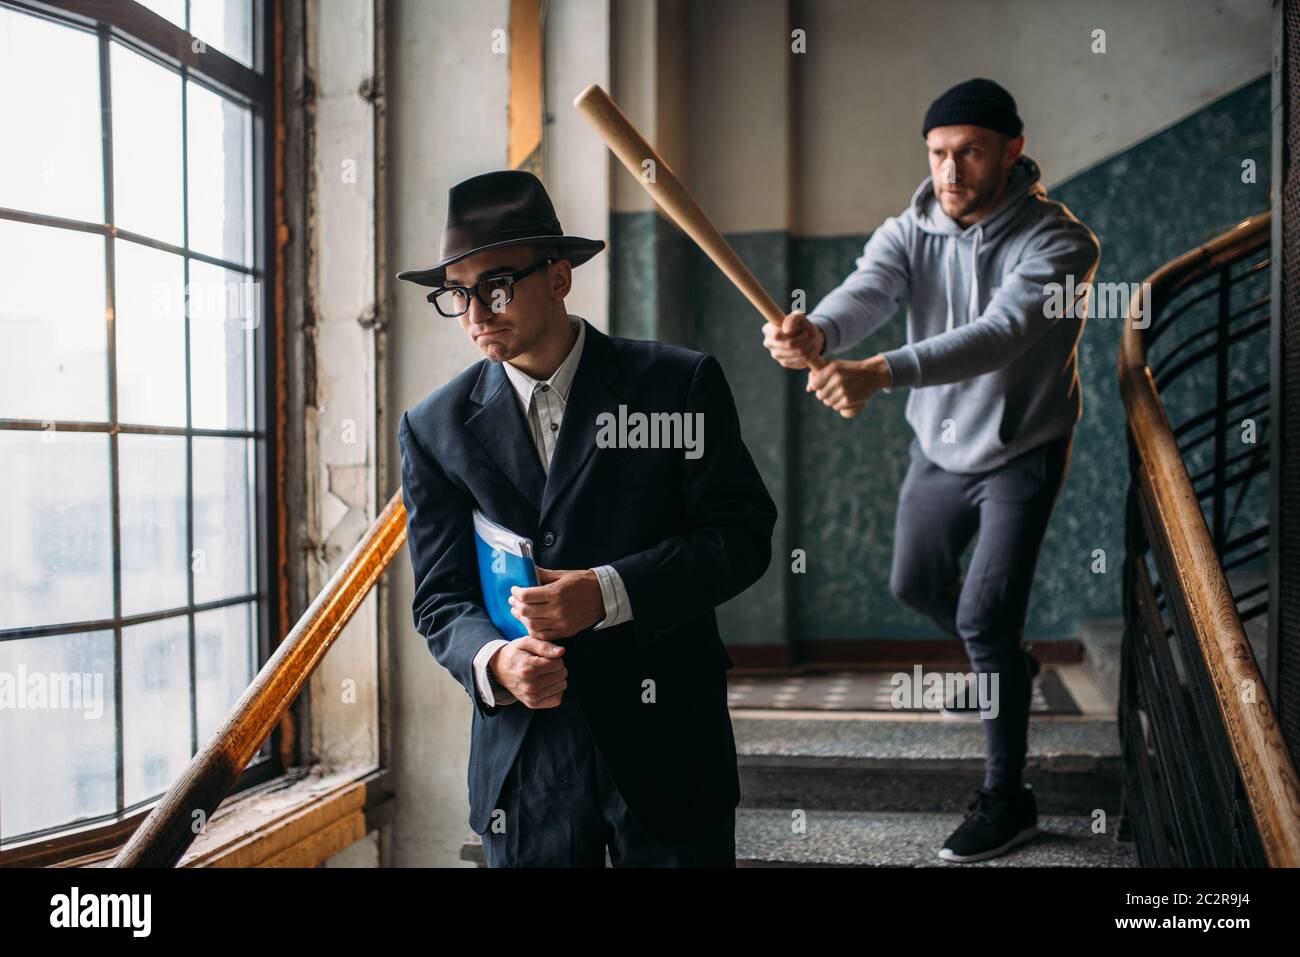 Male bandit with baseball bat attact his victim. Street hooligan commits a  robbery attack on a man. Crime concept Stock Photo - Alamy